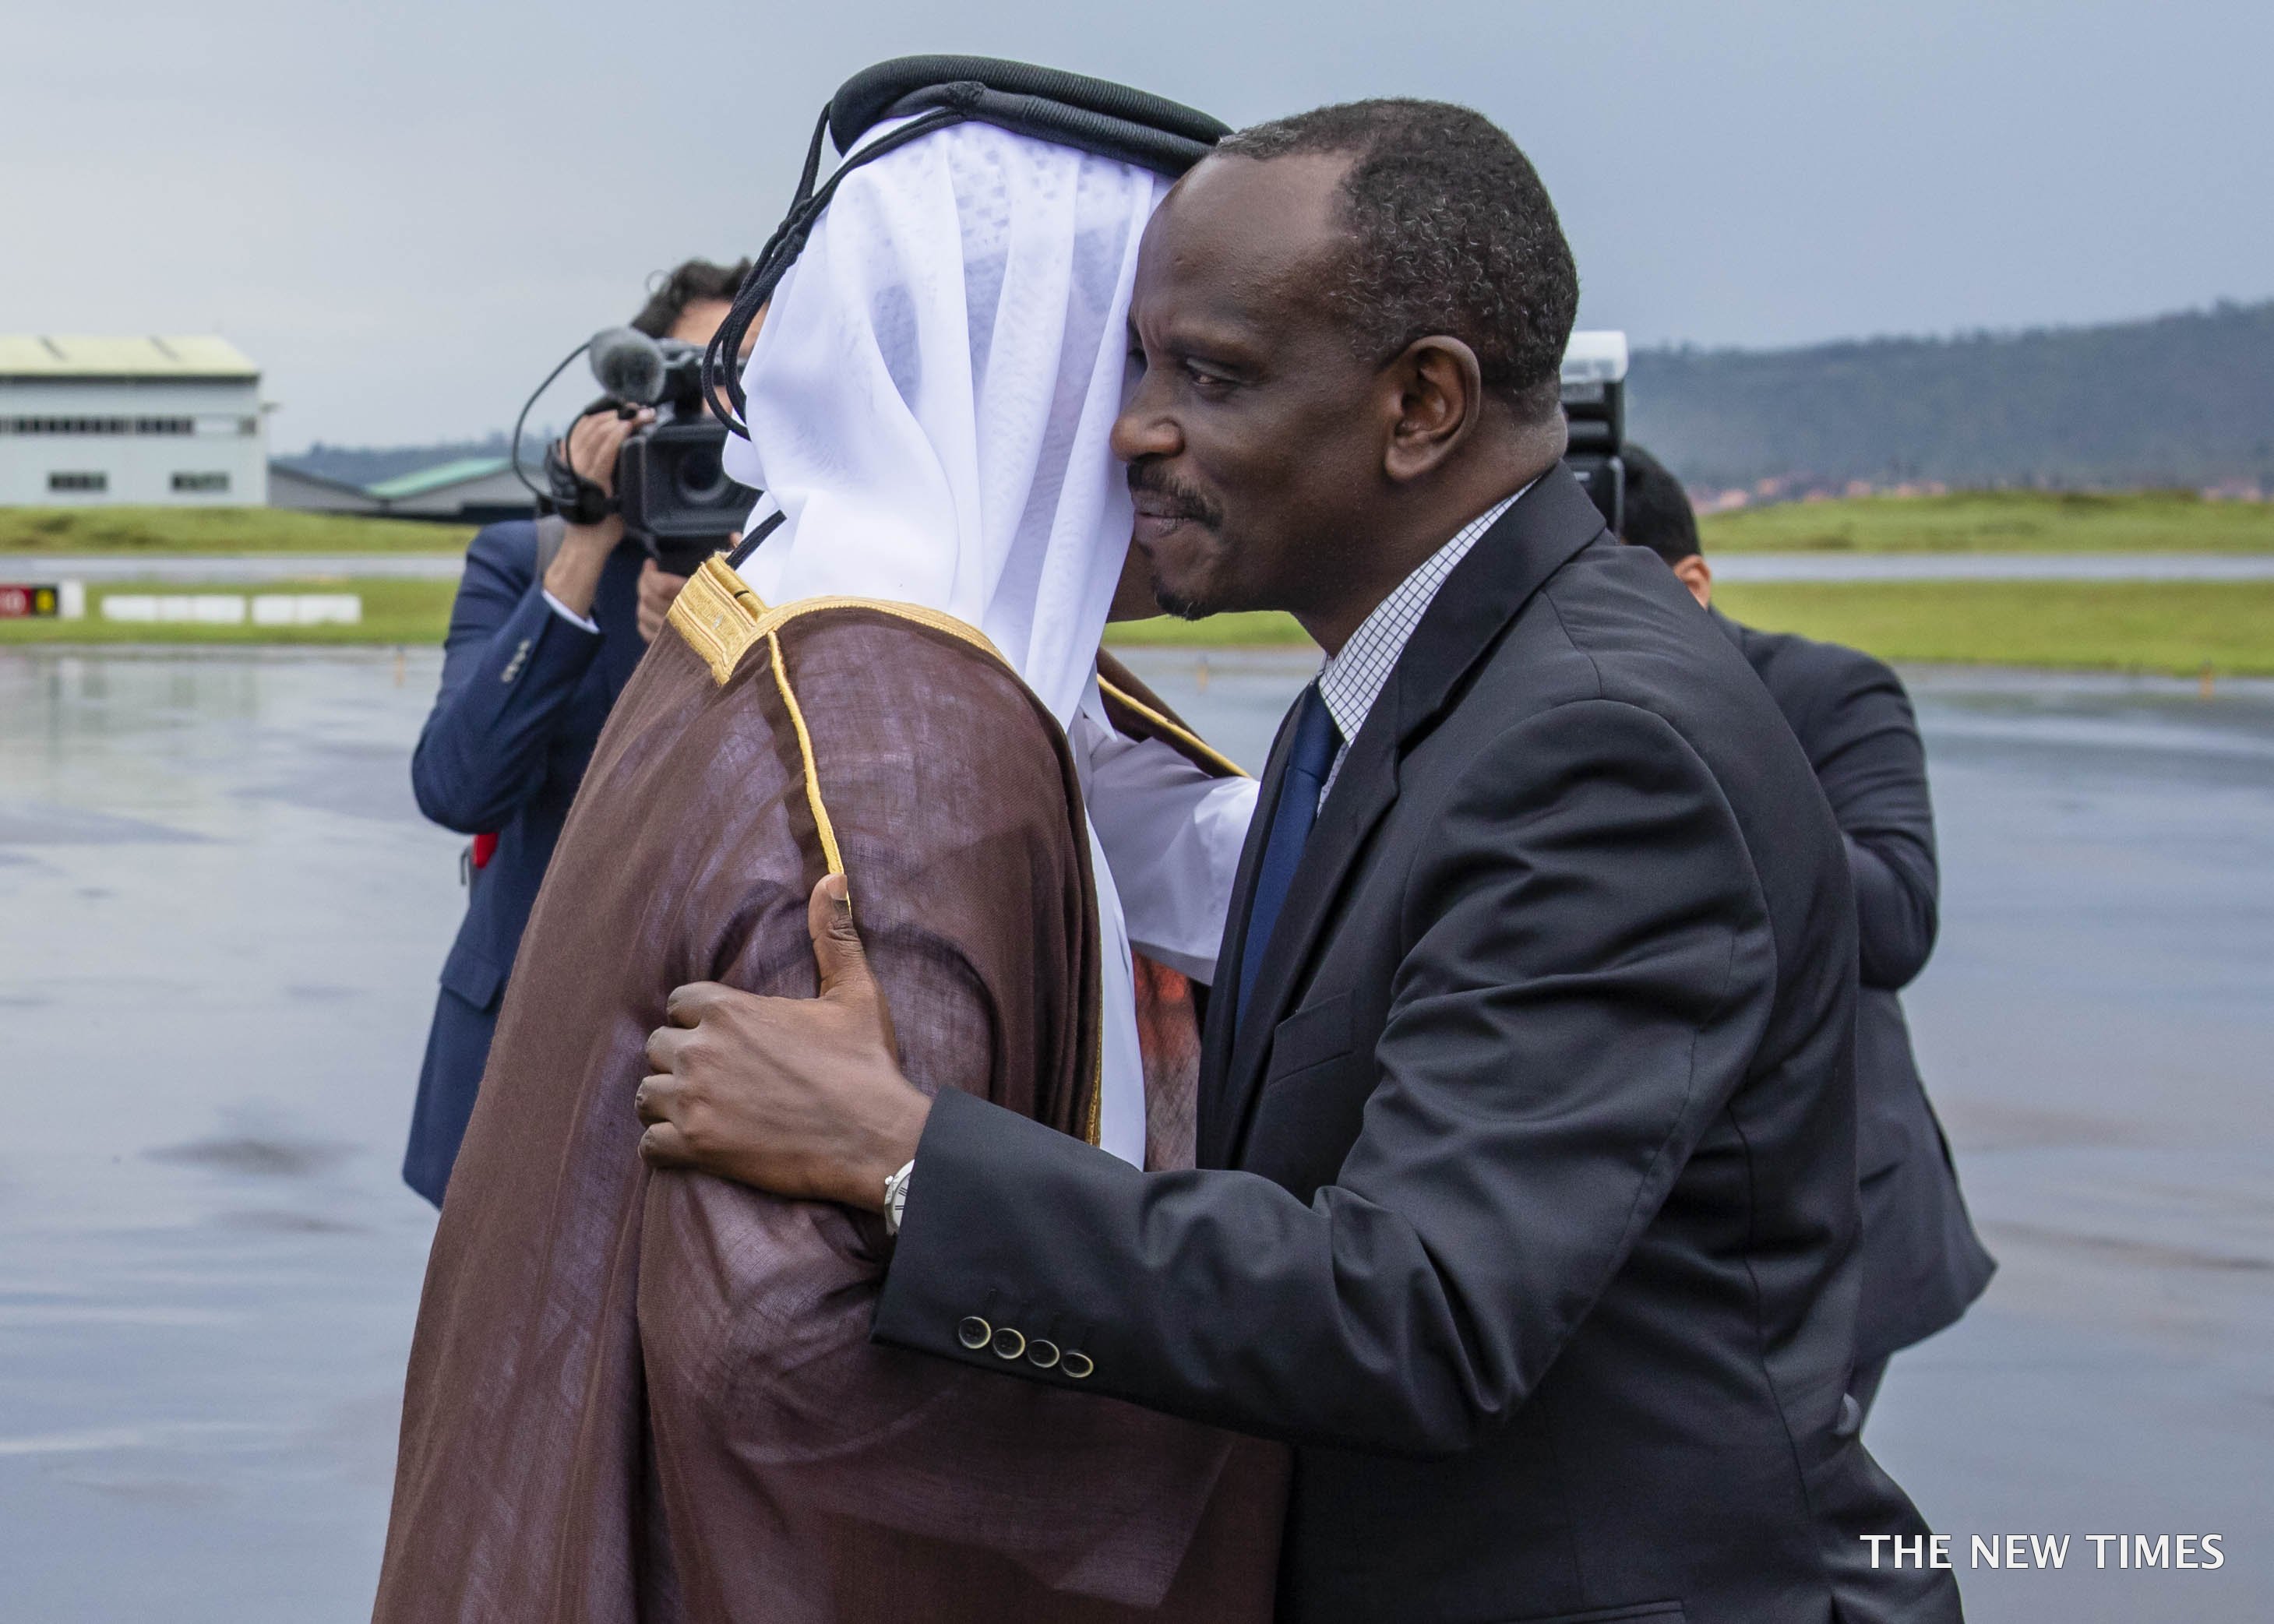 Sheikh Mohamed bin Abdulrahman Al Thani, Deputy Prime Minister and Minister of Foreign Affairs of Qatar, is received by Rwandaâ€™s Minister for Foreign Affairs Dr Richard Sezibera at Kigali International Airport on March 21, 2019. Emmanuel Kwizera.